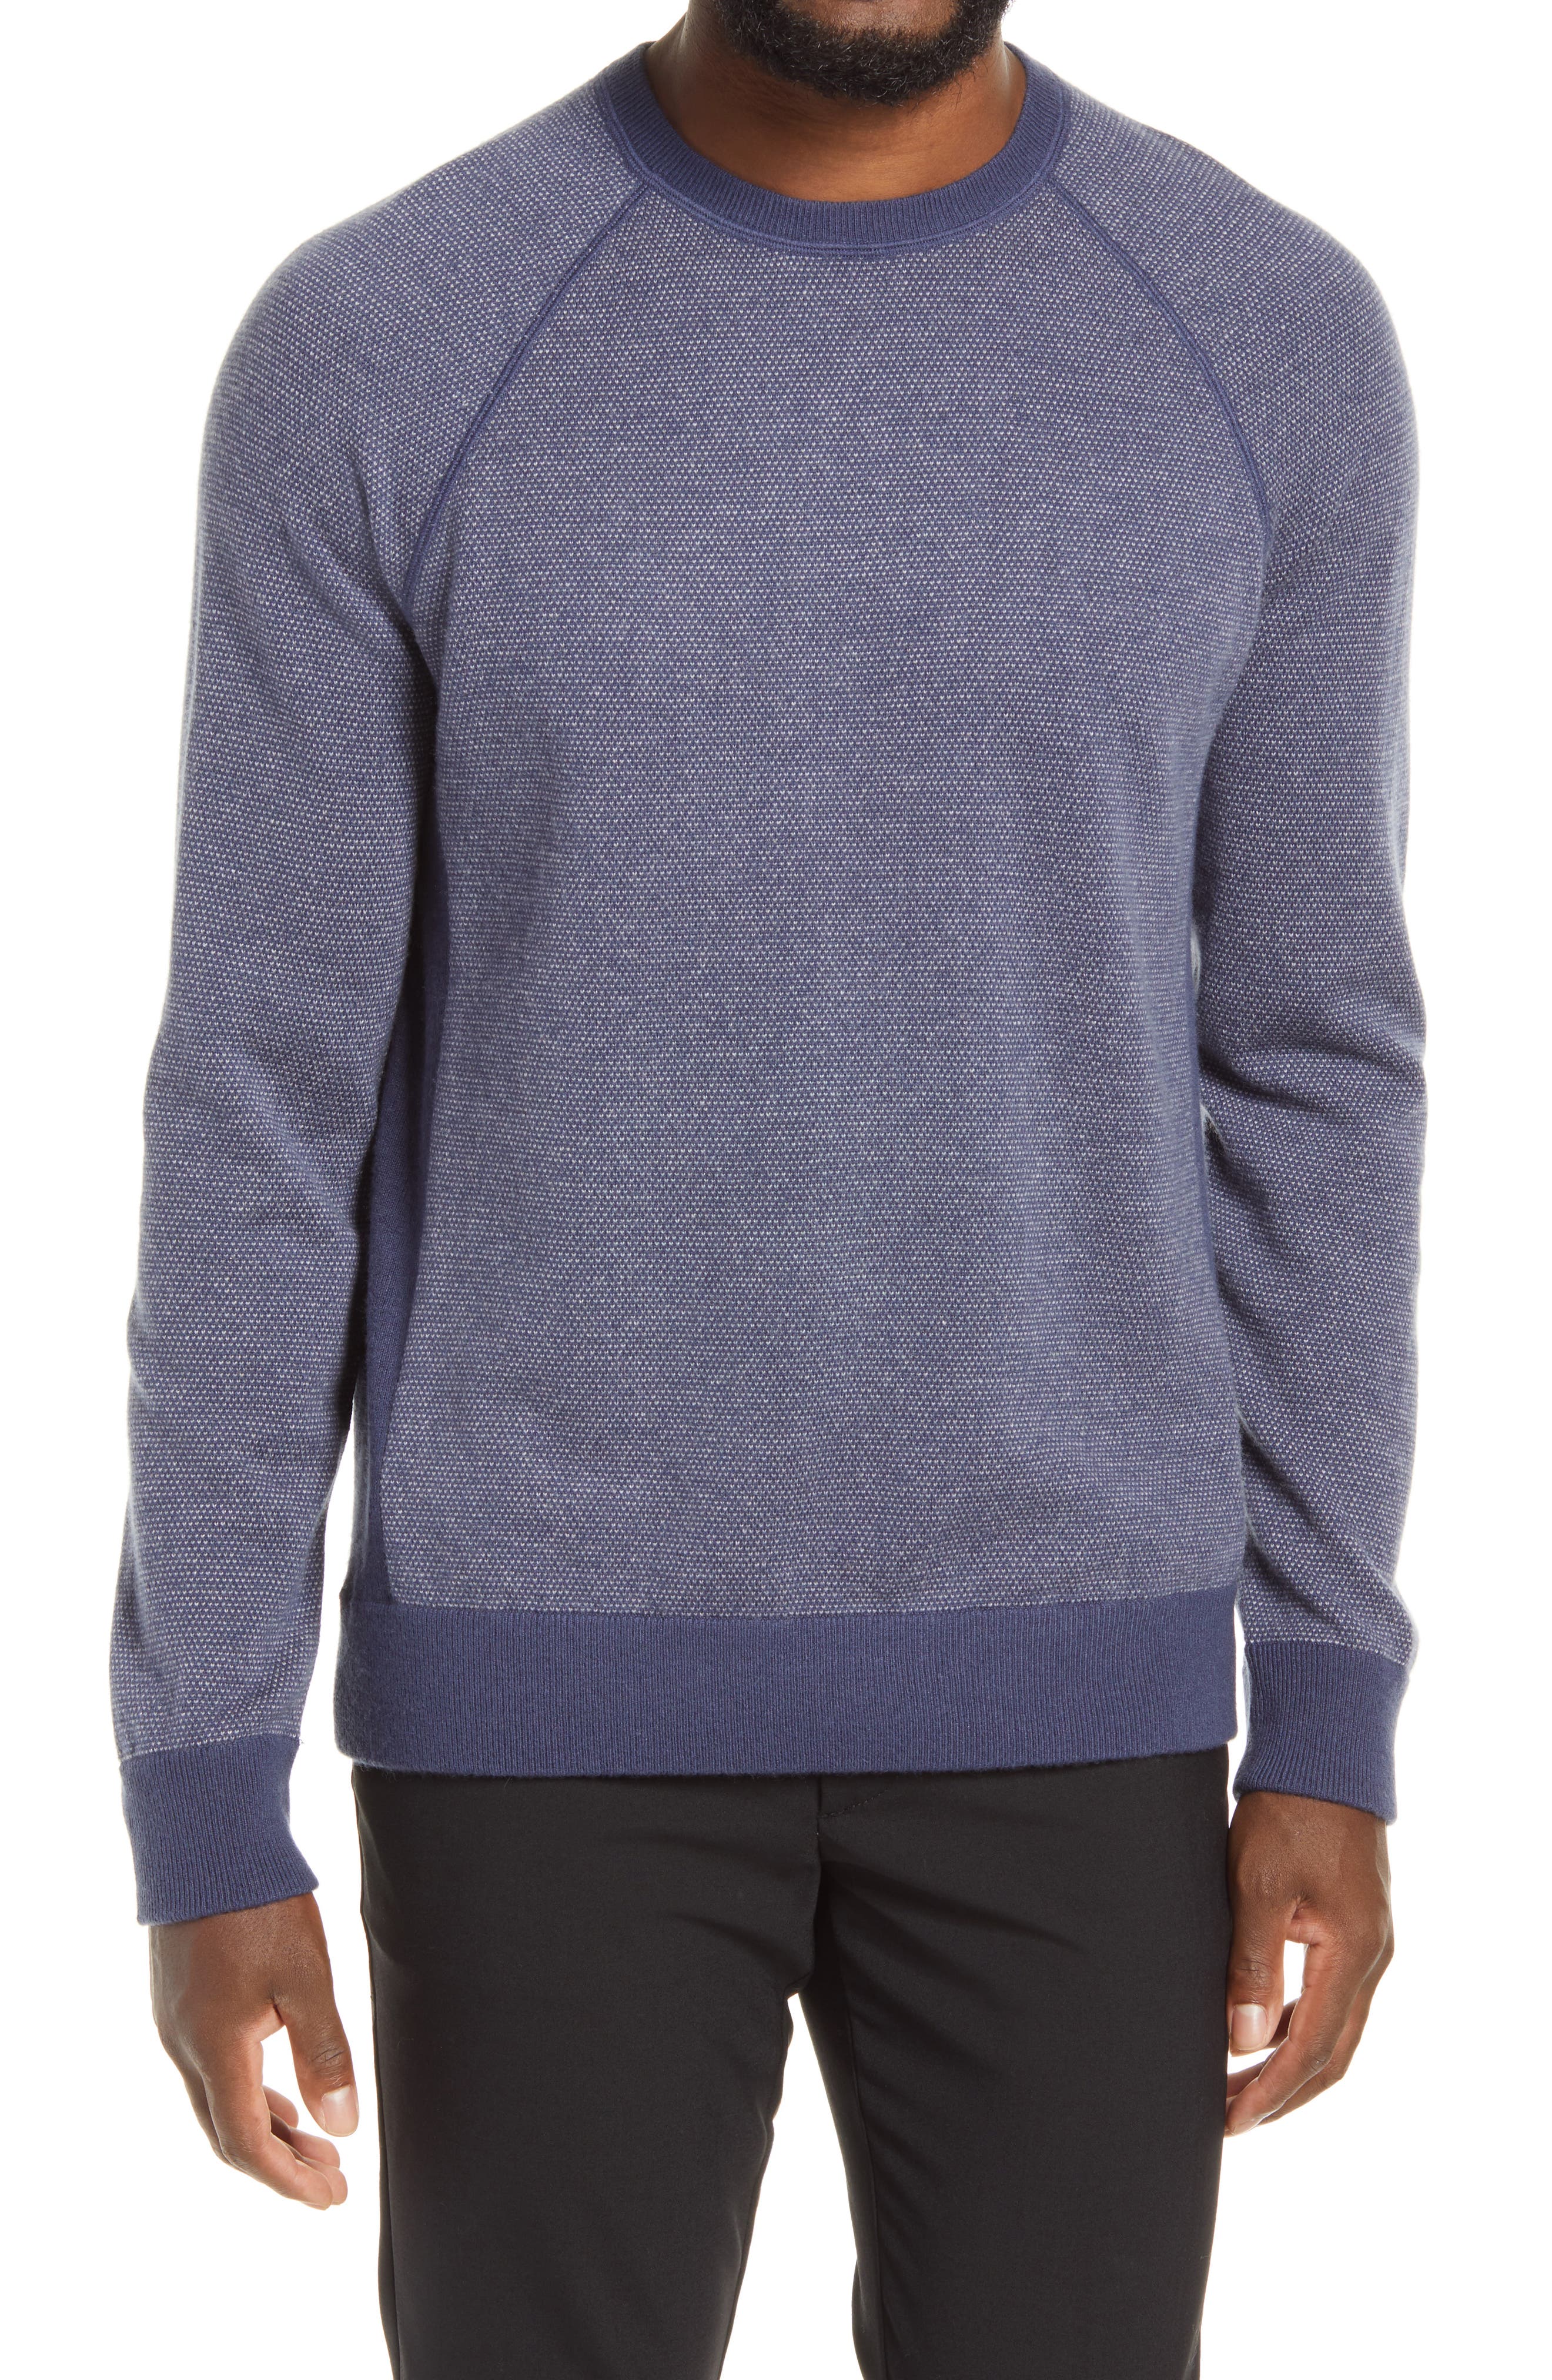 Vince Bird's Eye Stitch Wool & Cashmere Sweater In Light Imperial Blue/ Grey